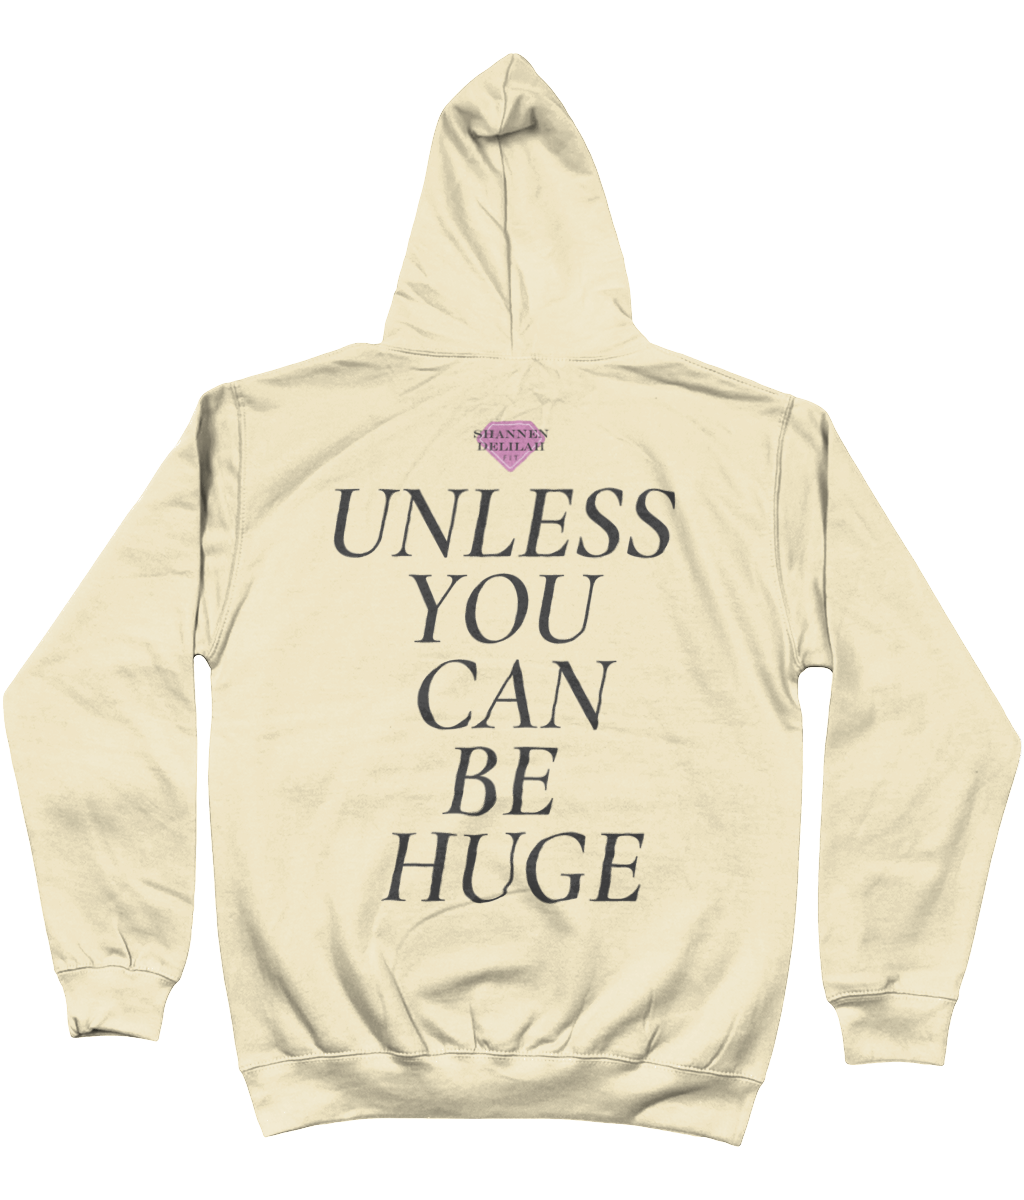 BE YOURSELF HOODIE